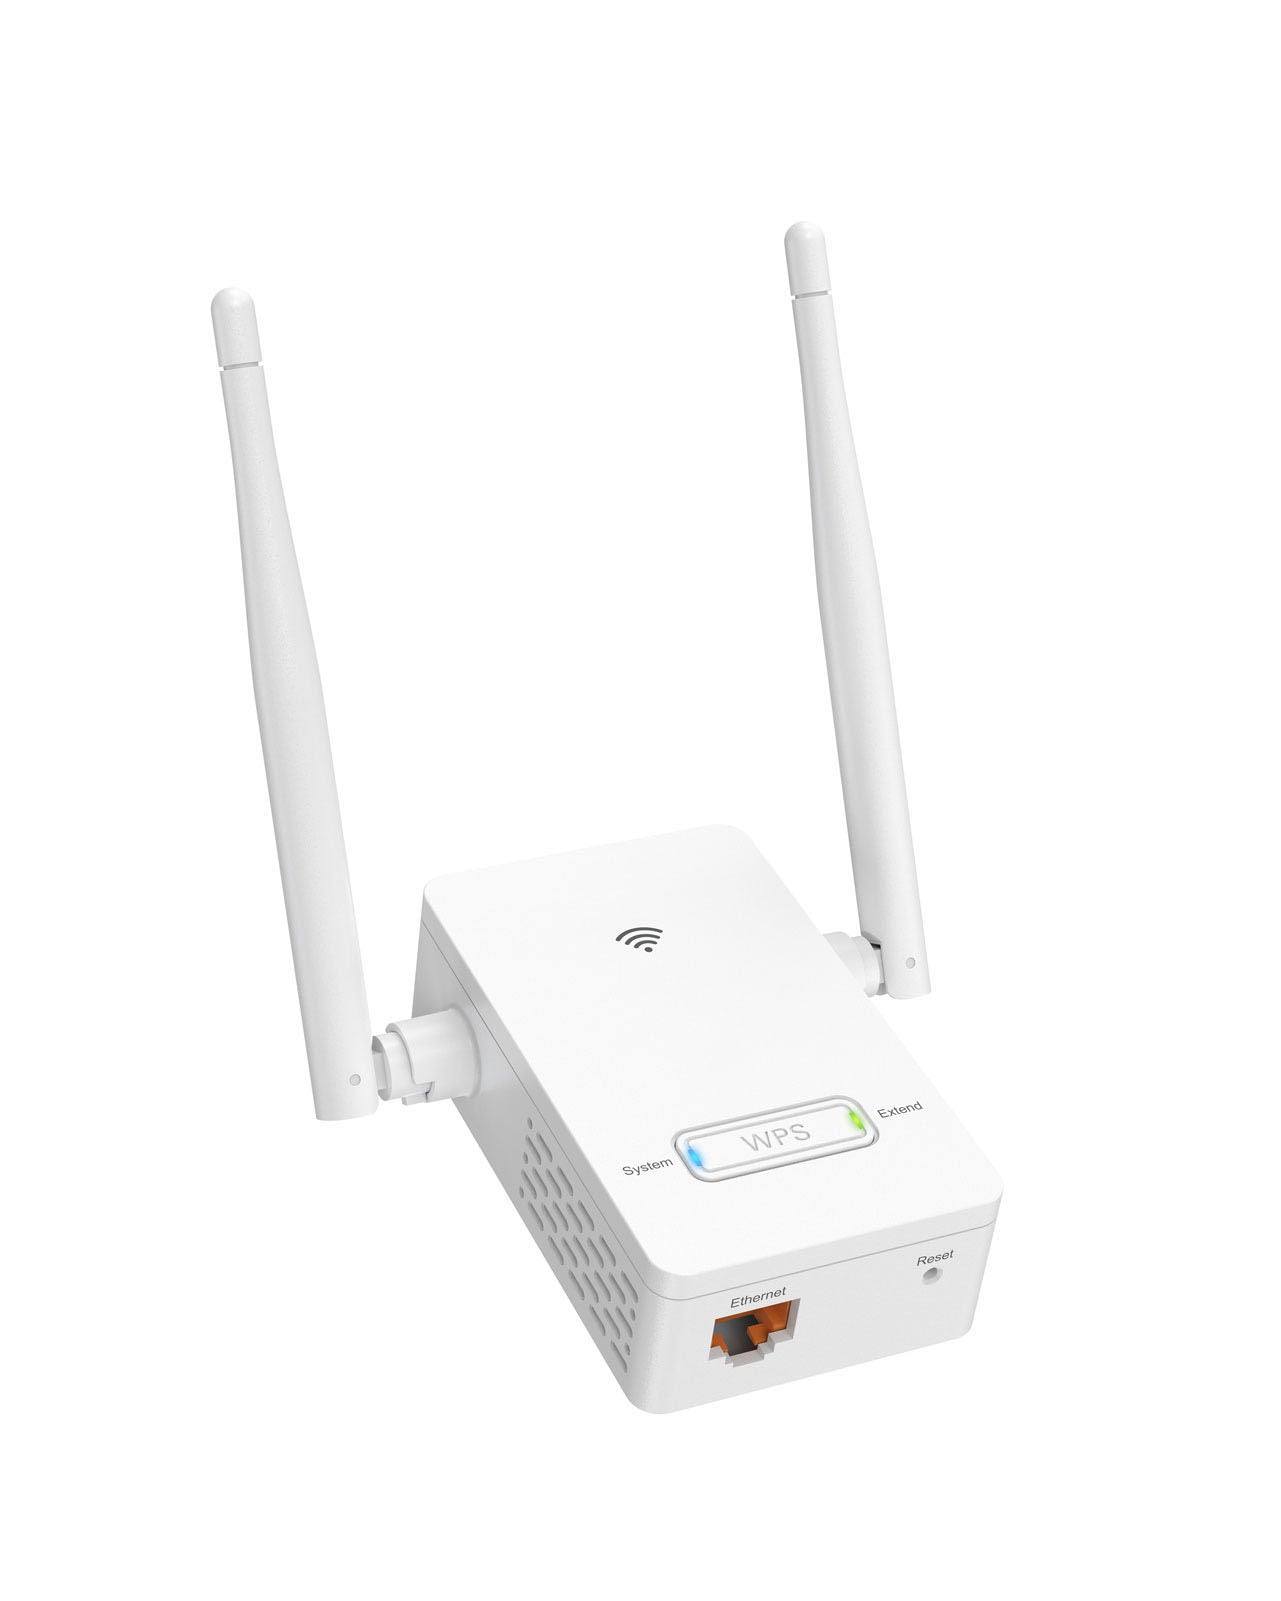 300Mbps wifi to ethernet adapter